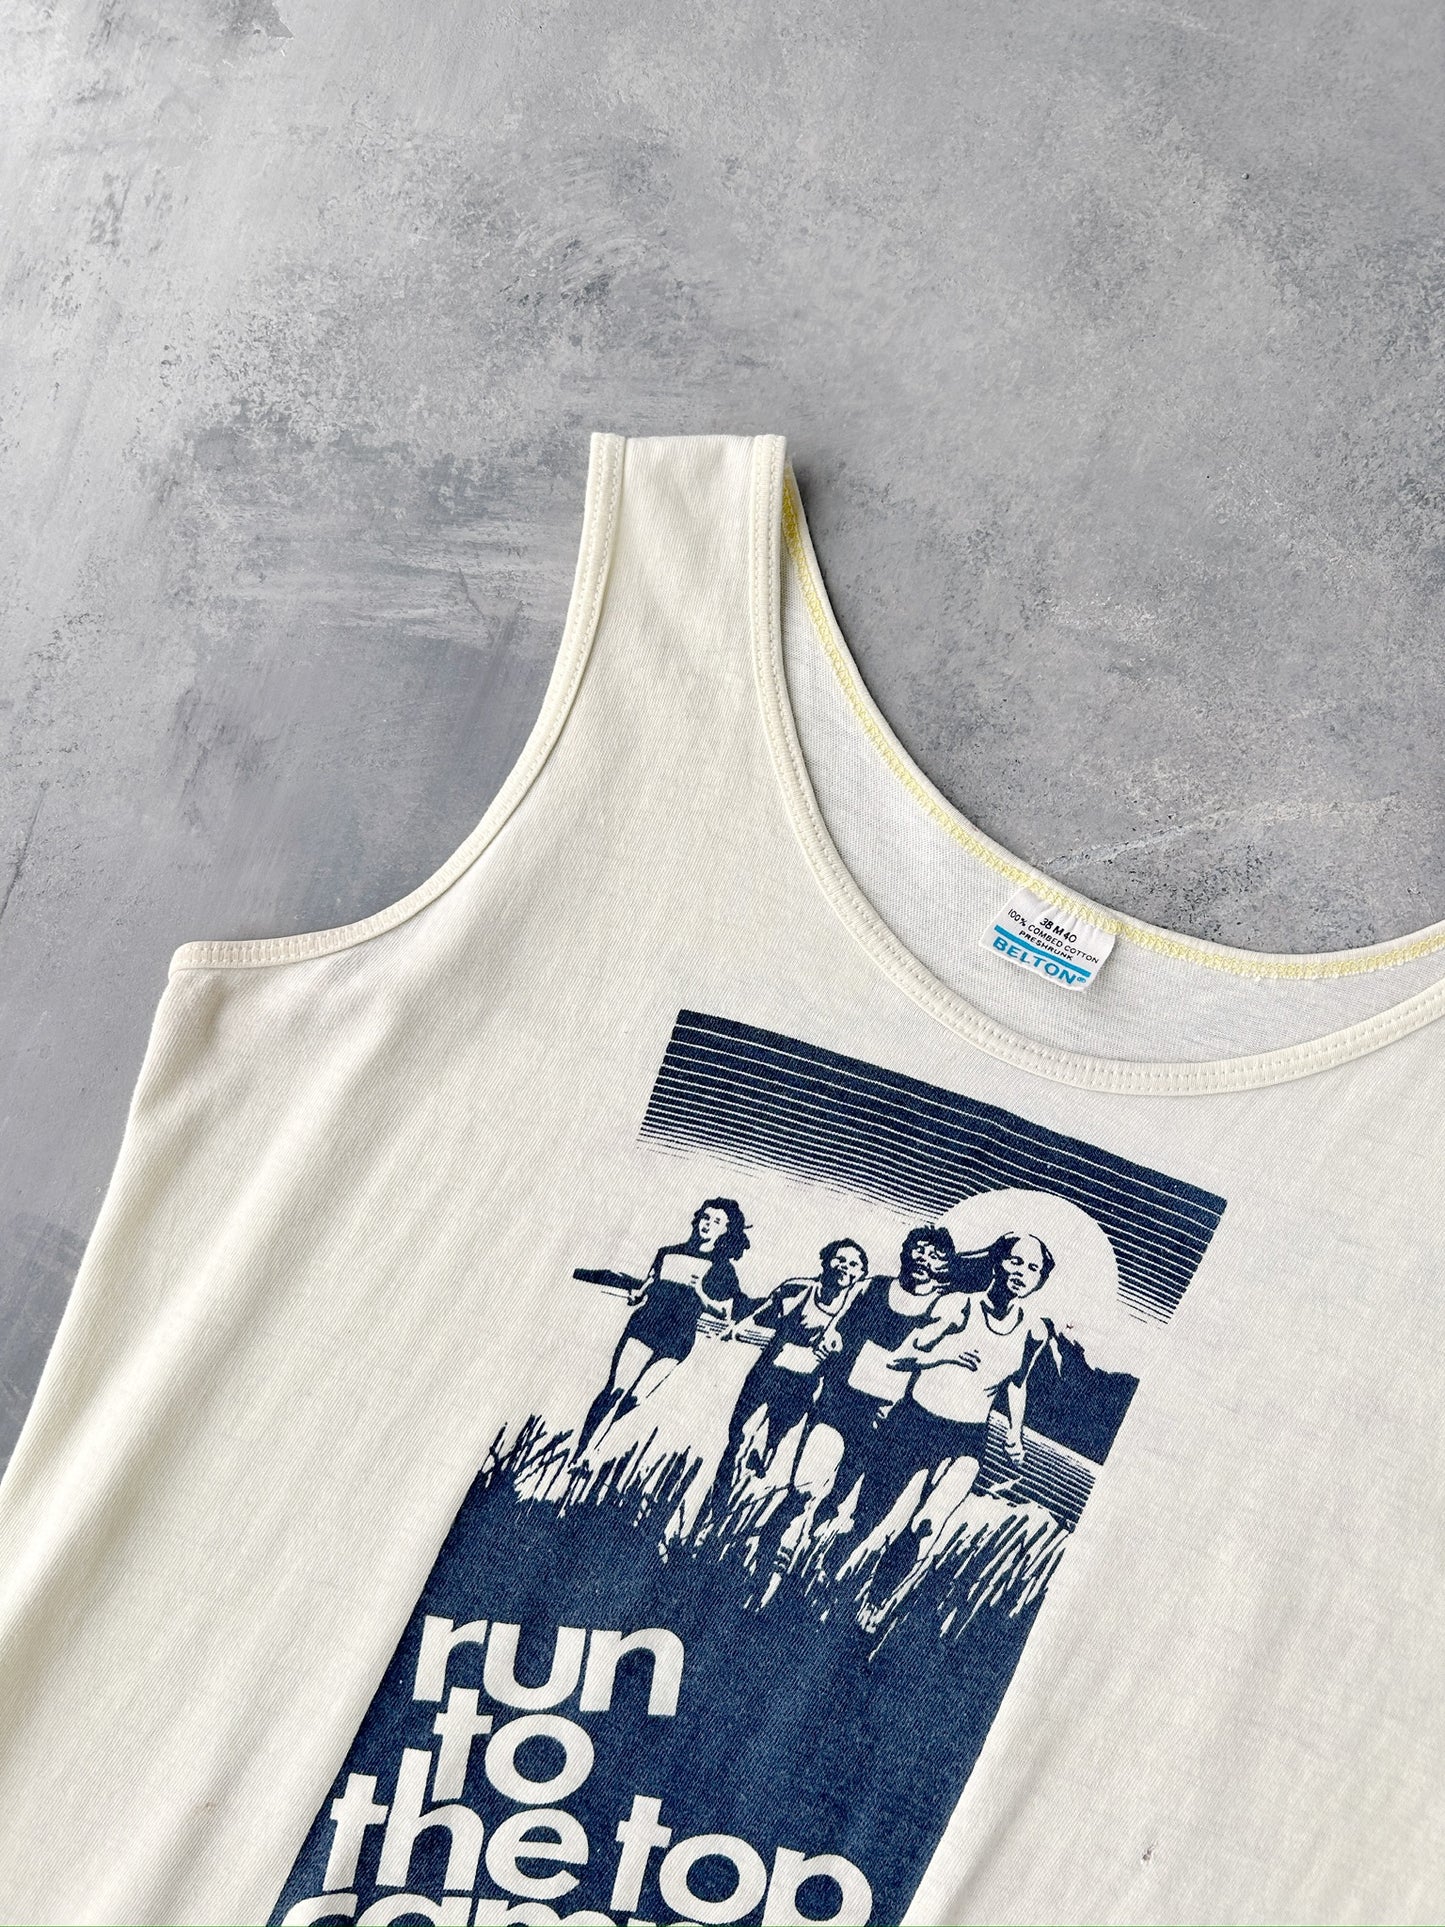 Running Camp Tank Top 80's - Small